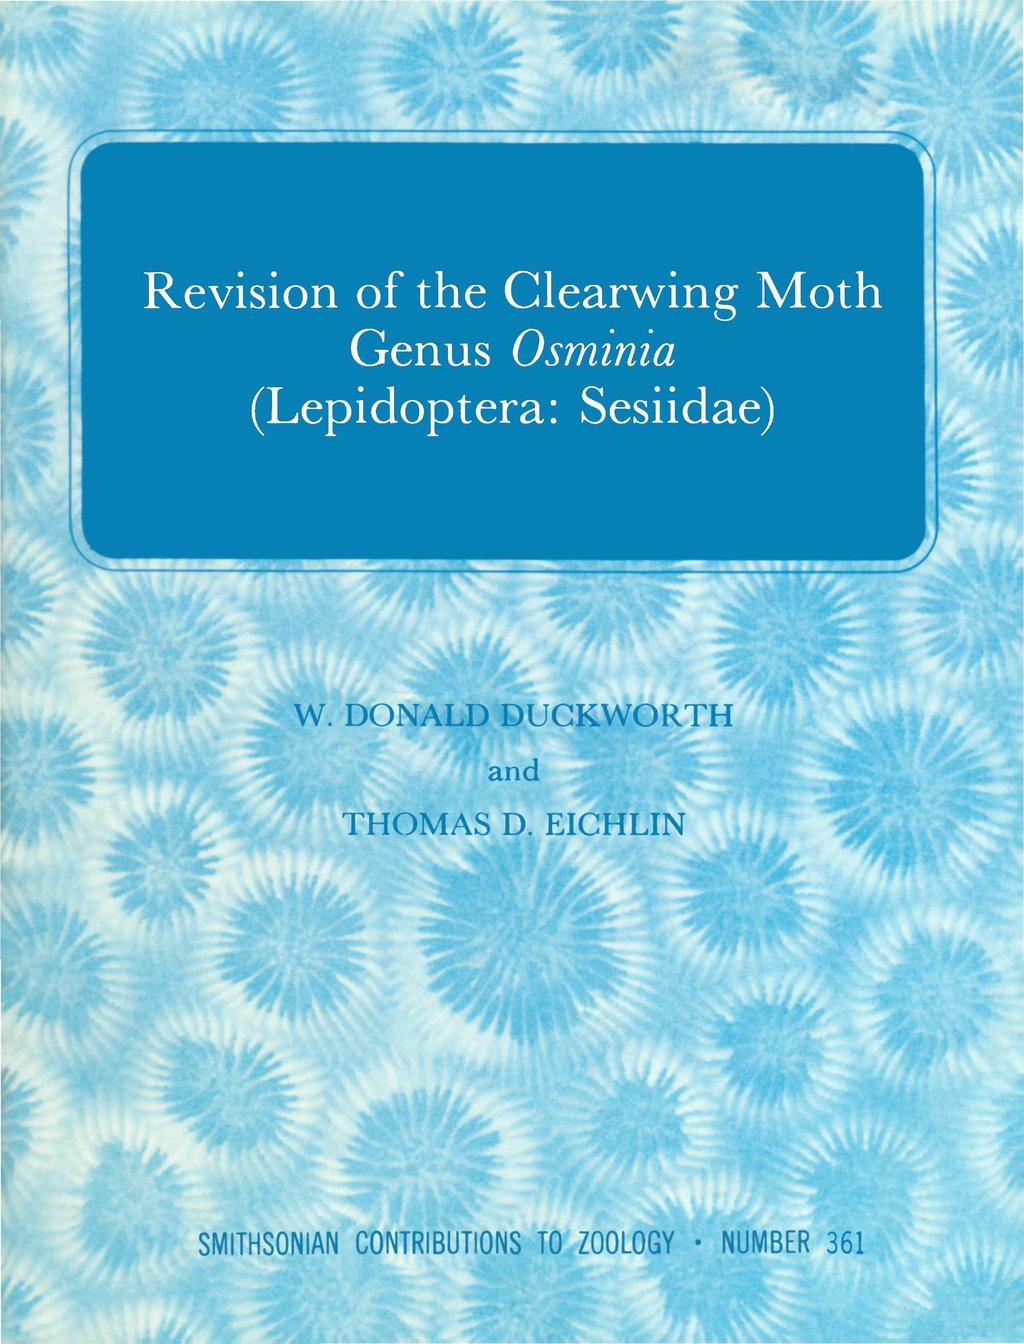 Revision of the Clearwing Moth Genus Osminia (Lepidoptera: Sesiidae) W.